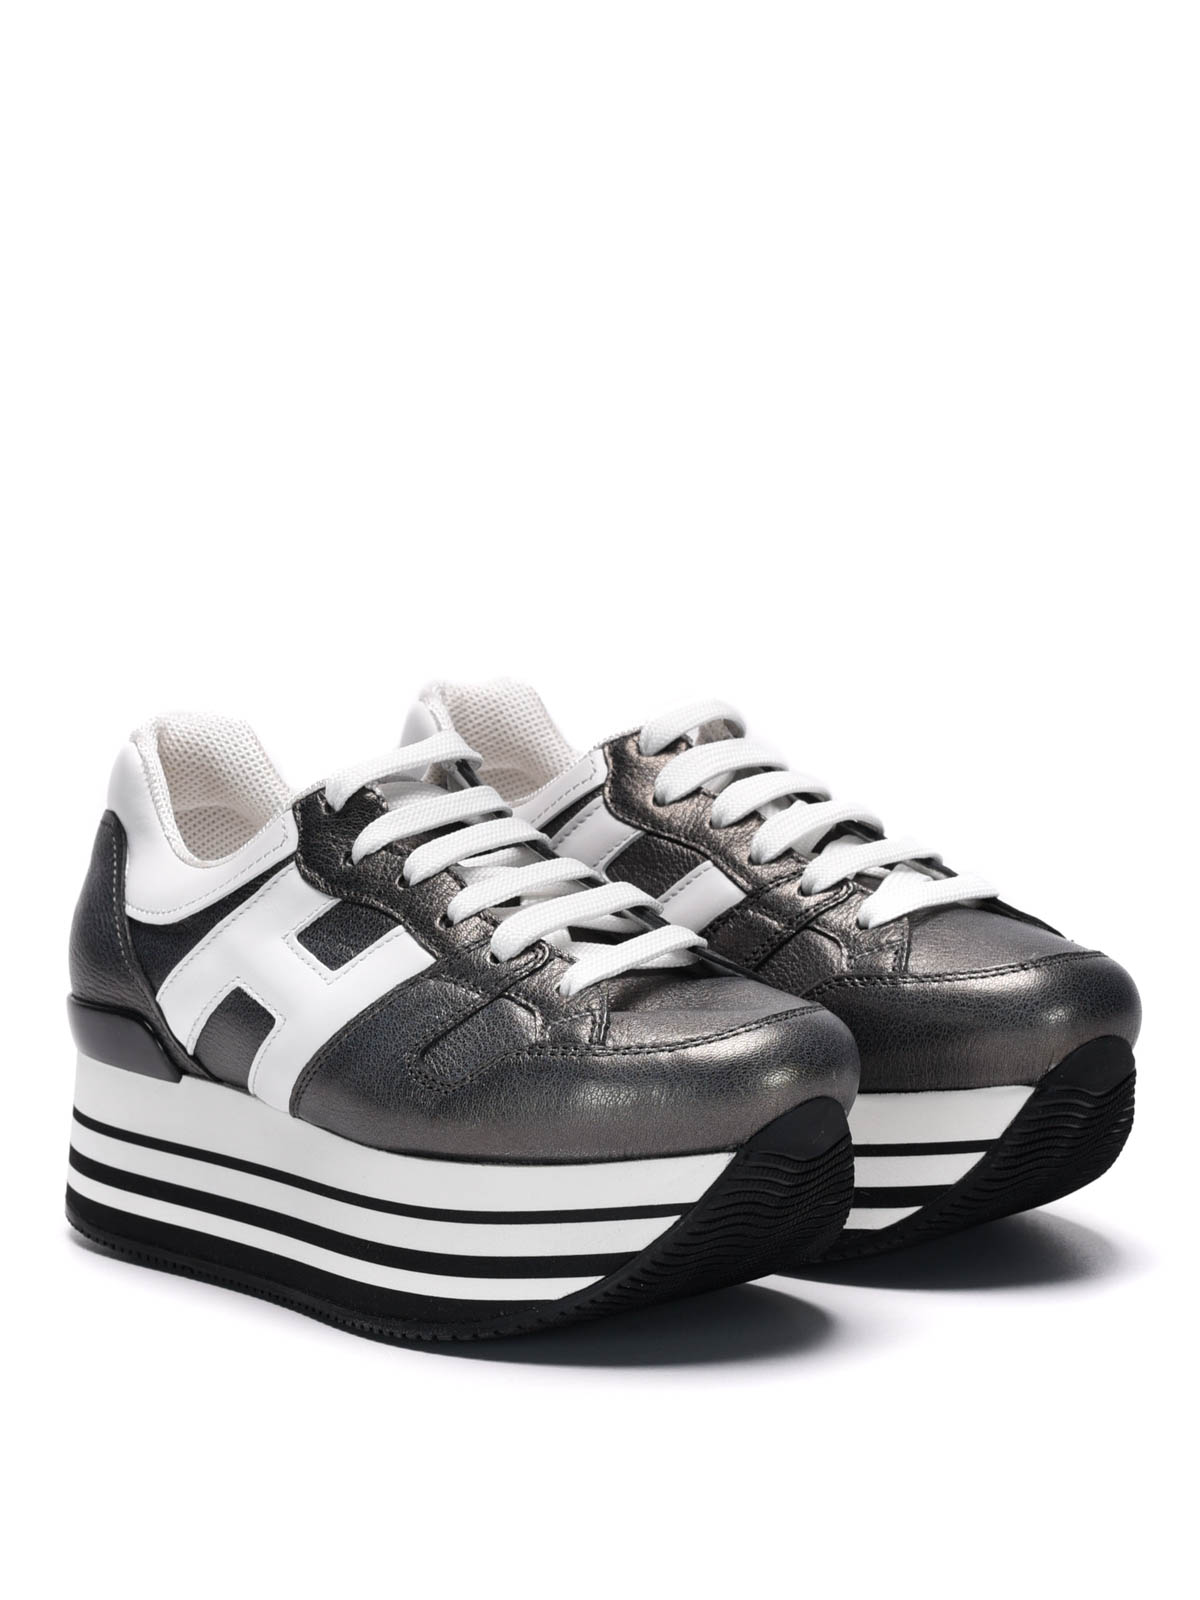 Hogan - Maxi H222 leather sneakers 